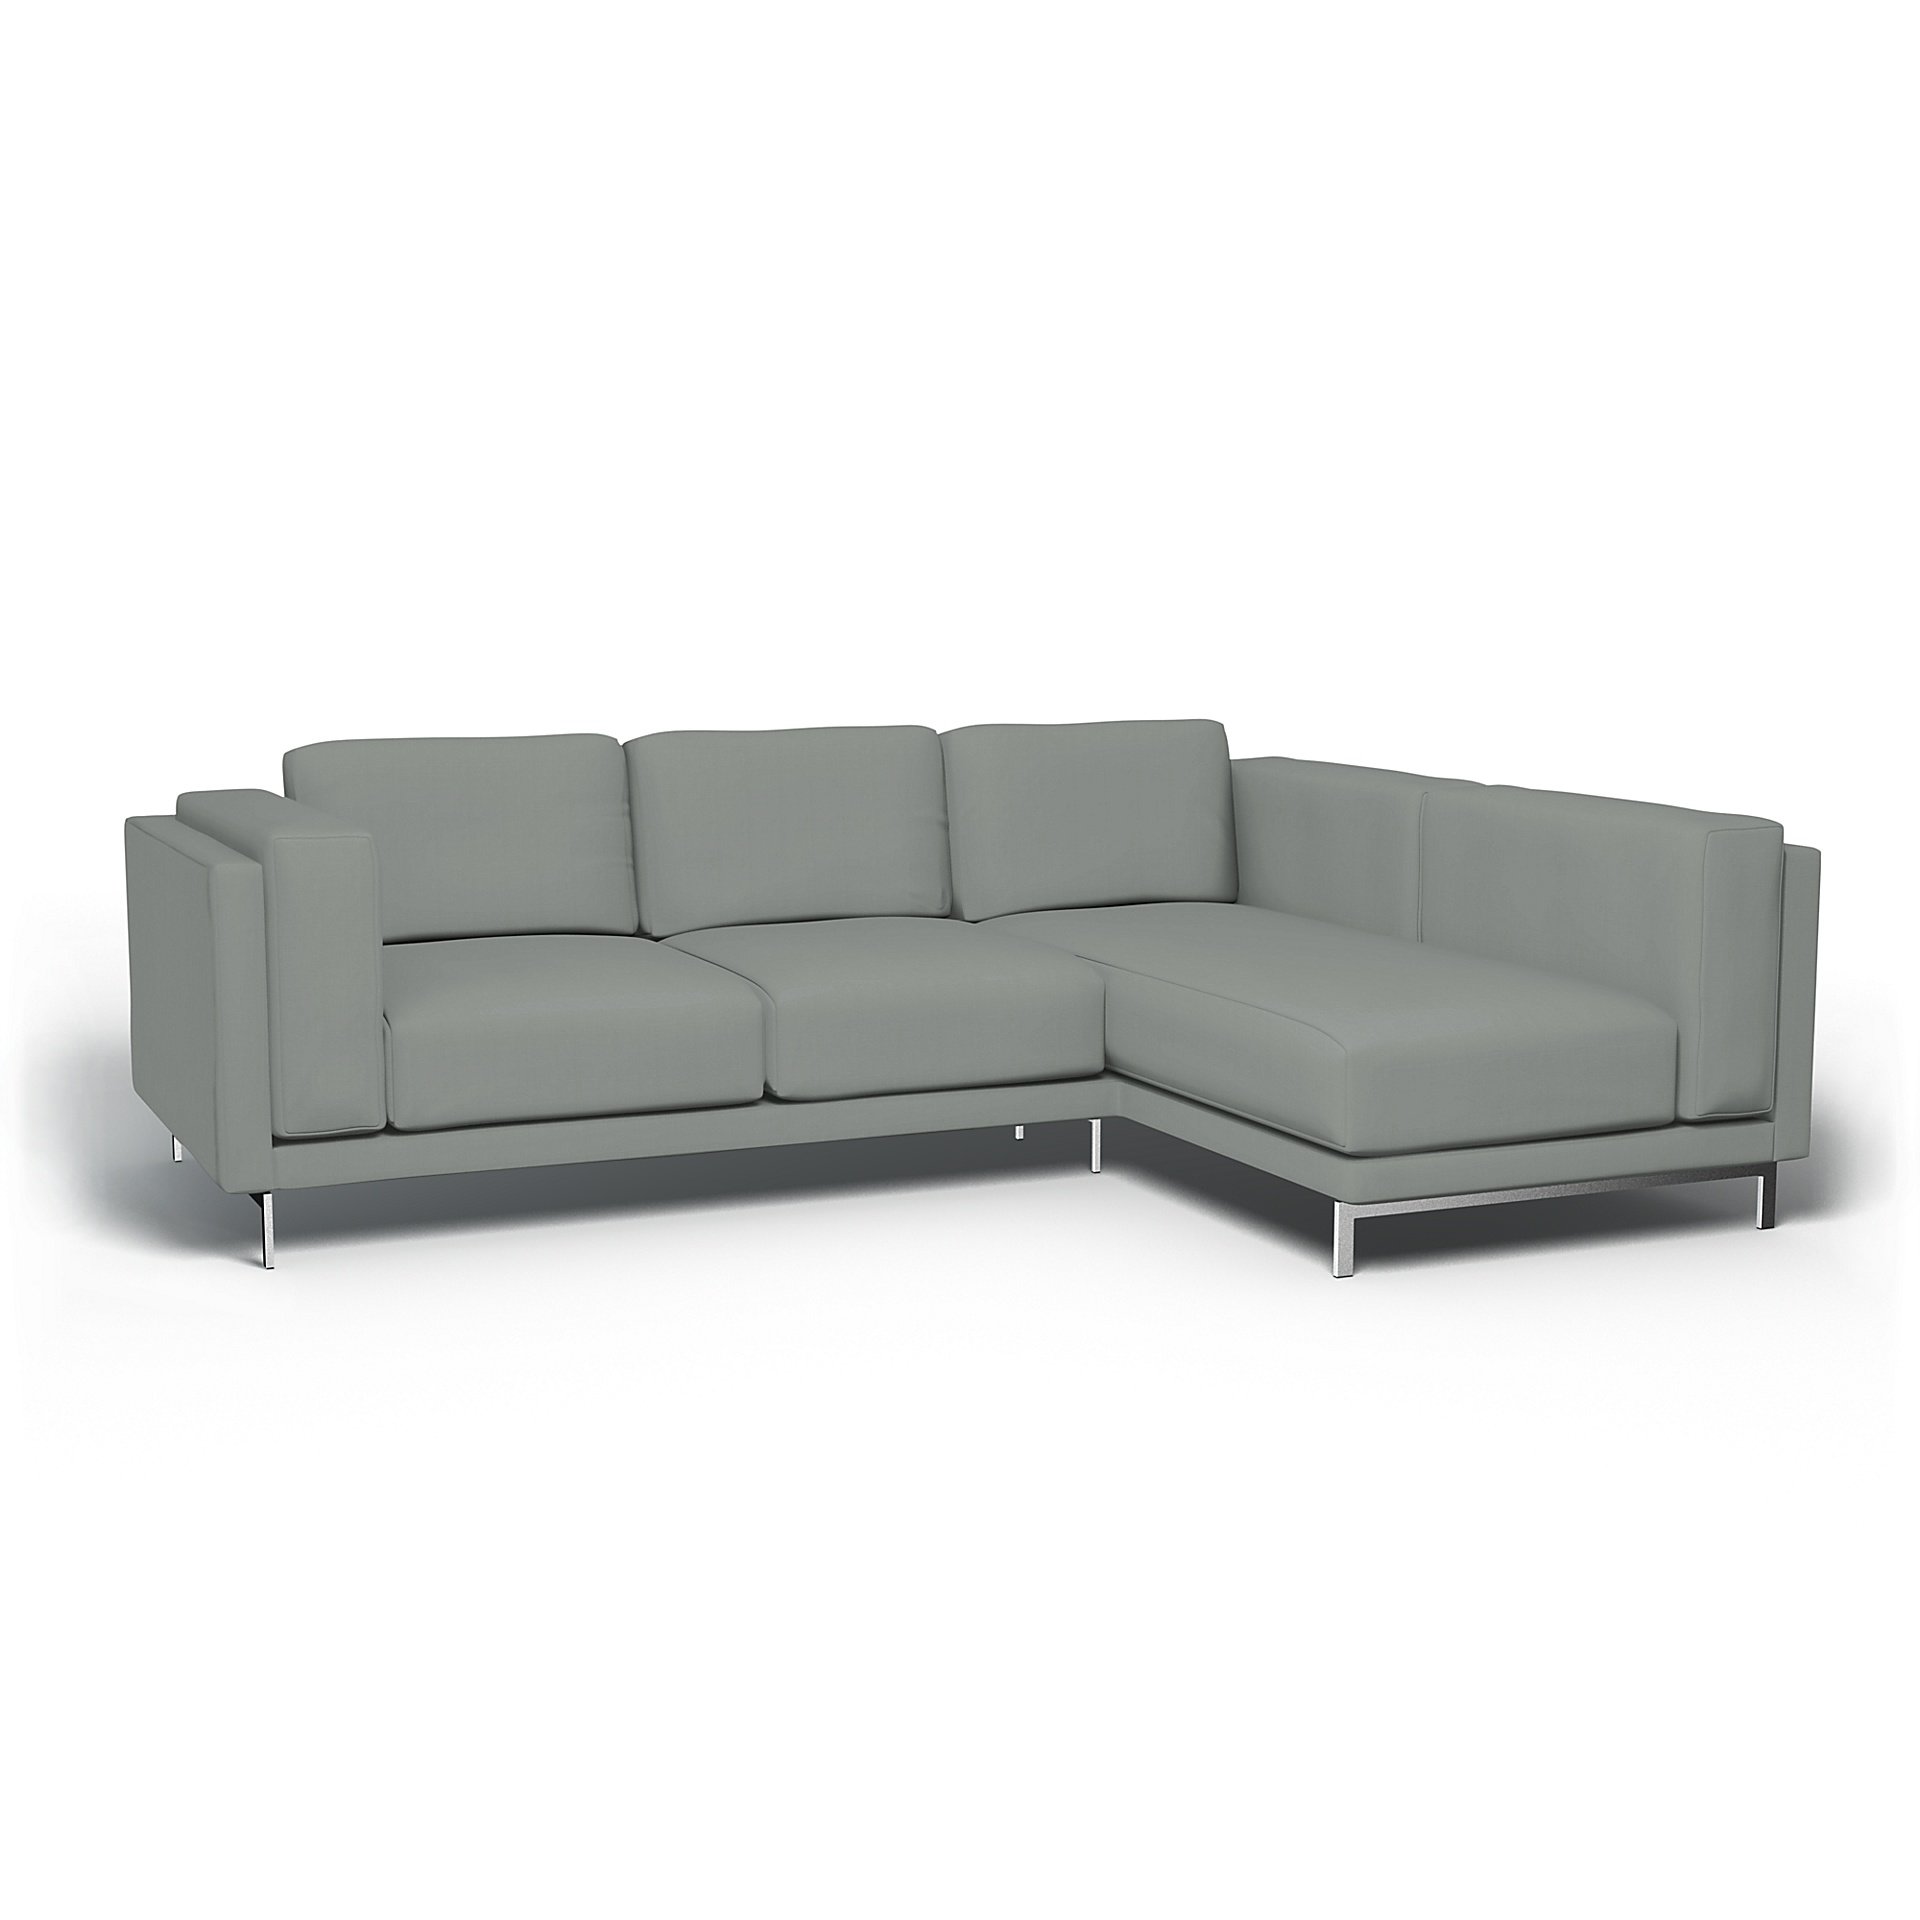 IKEA - Nockeby 3 Seat Sofa with Right Chaise Cover, Drizzle, Cotton - Bemz